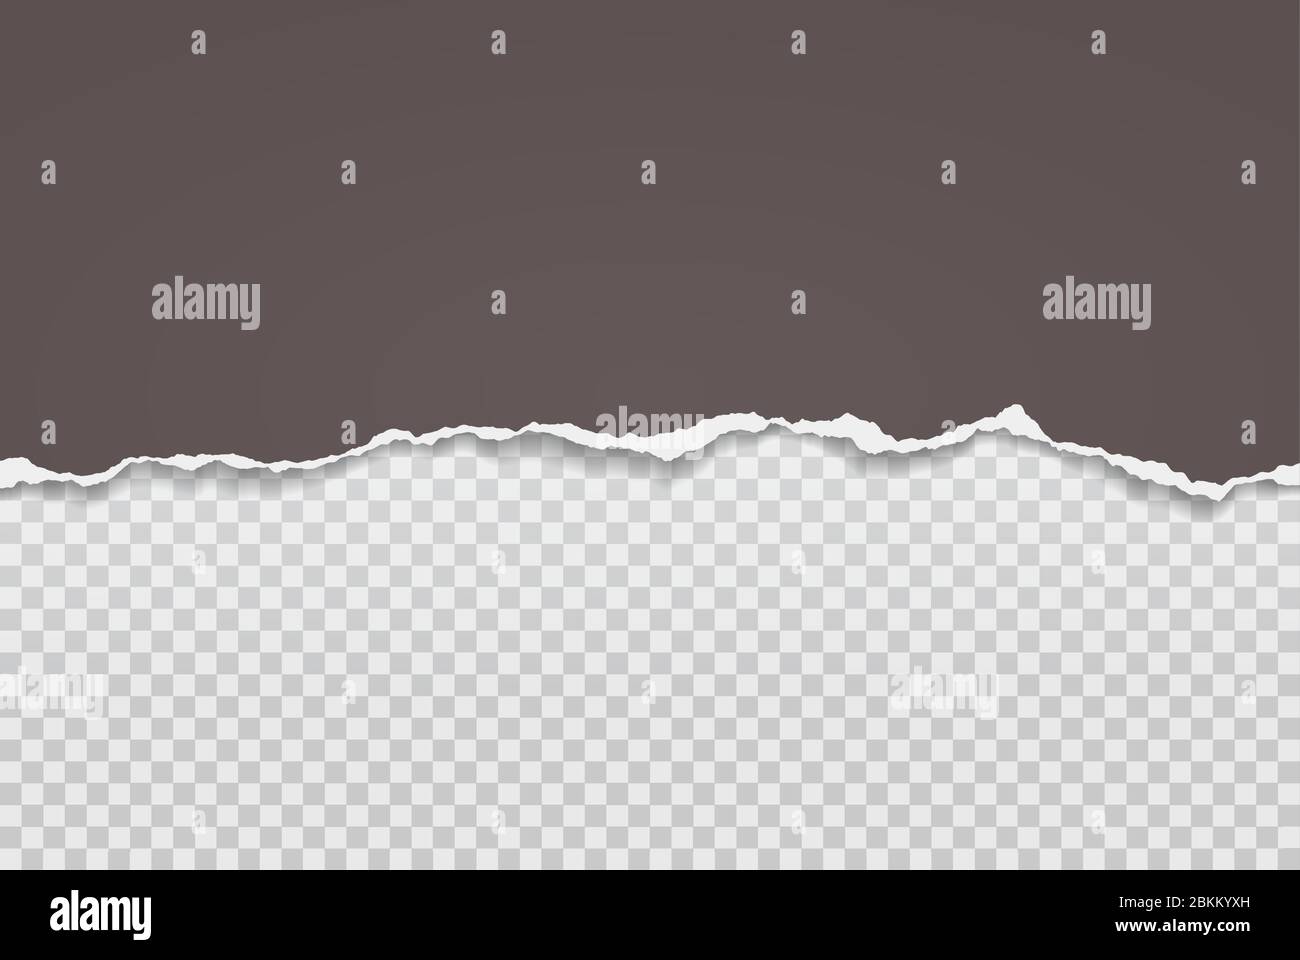 Torn, ripped piece of horizontal brown paper with soft shadow are on squared grey background for text. Vector illustration Stock Vector